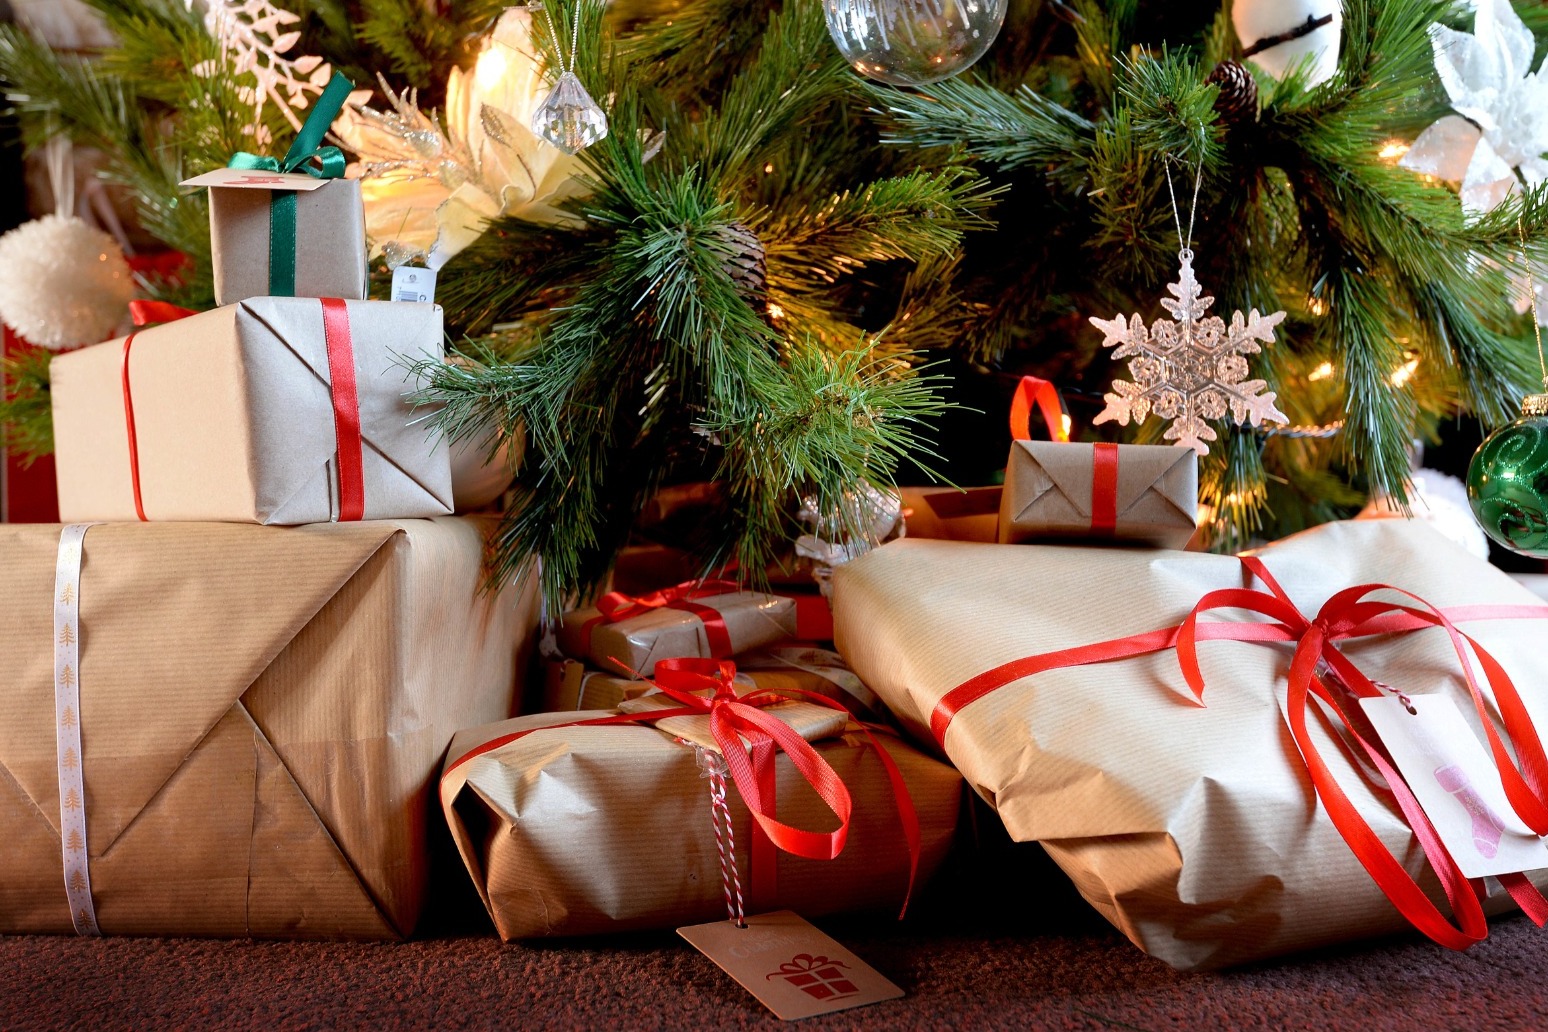 Third of consumers plan to return or give up Christmas gifts poll finds